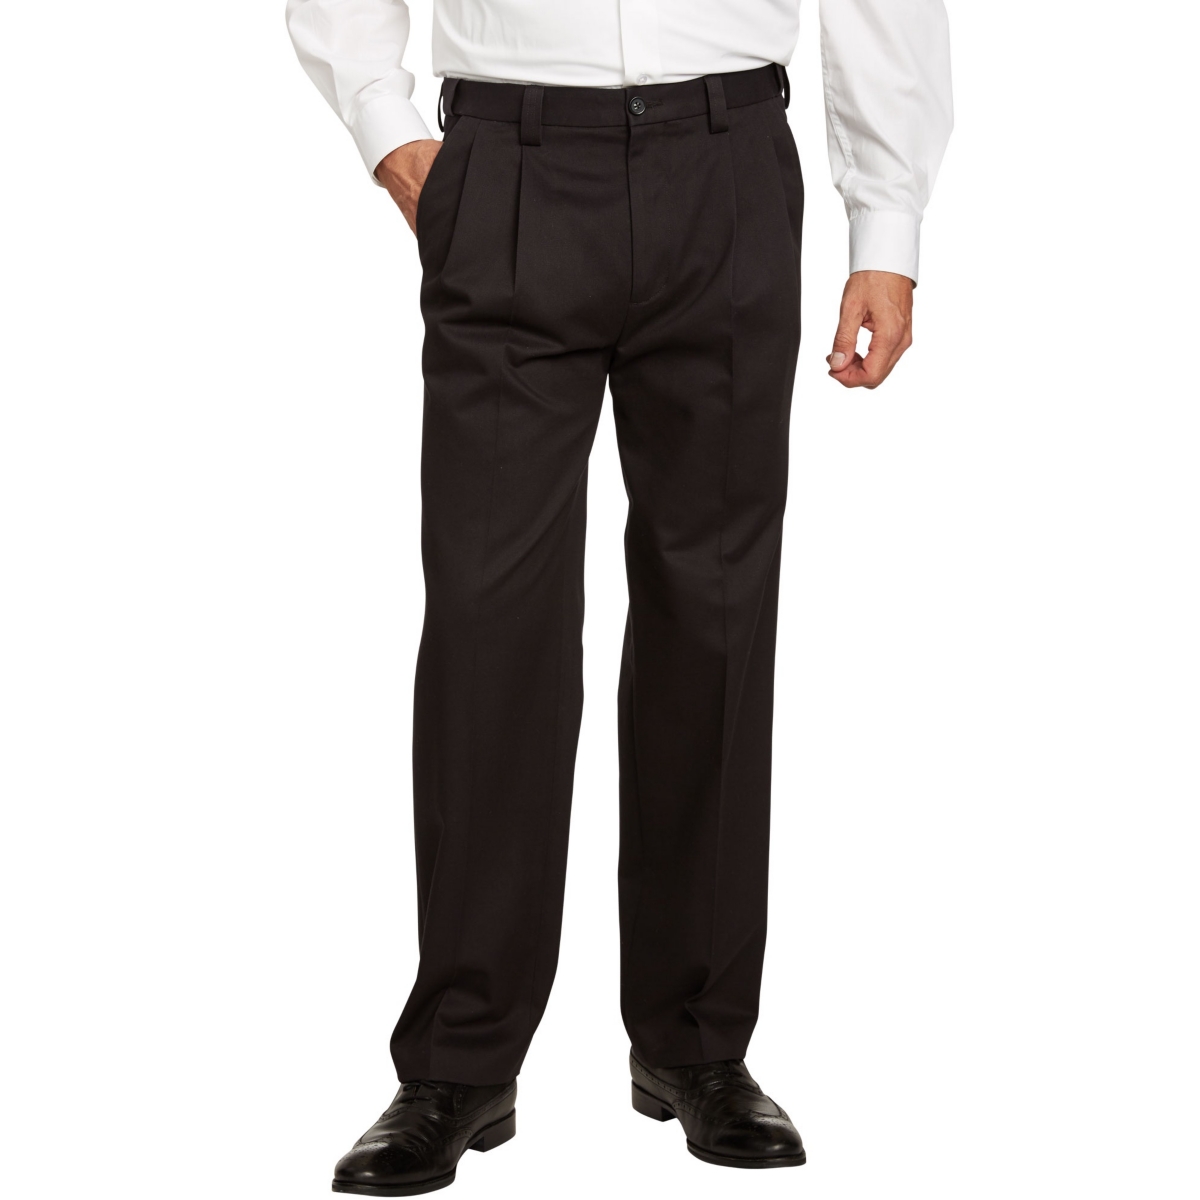 Big & Tall Classic Fit Wrinkle-Free Expandable Waist Pleat Front Pants - Black